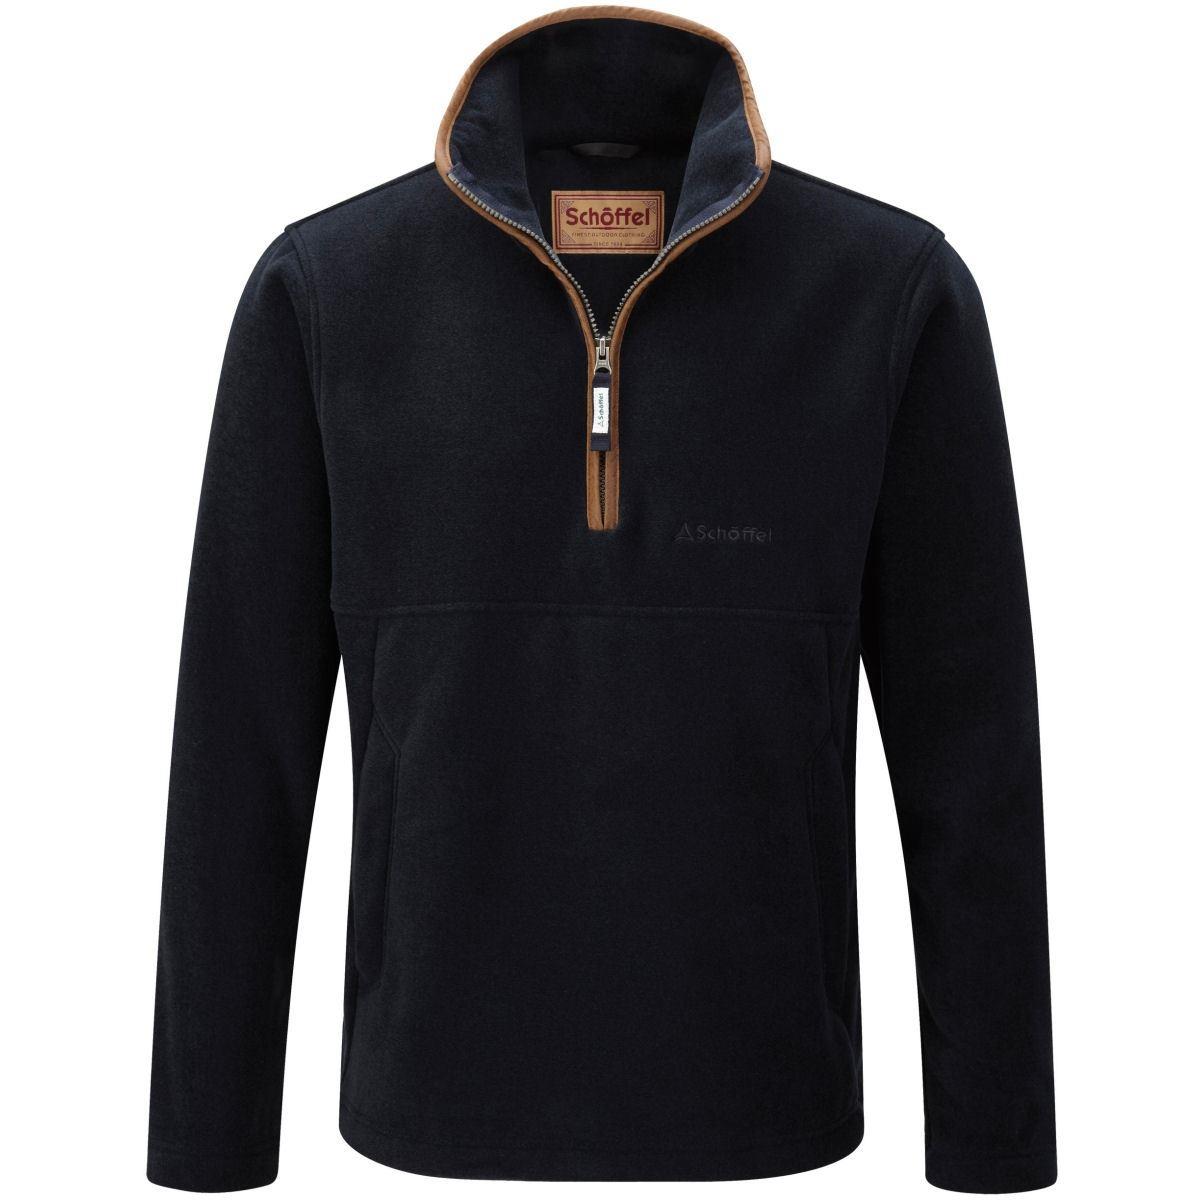 What colors and sizes are available for the Schoffel quarter zip fleece?